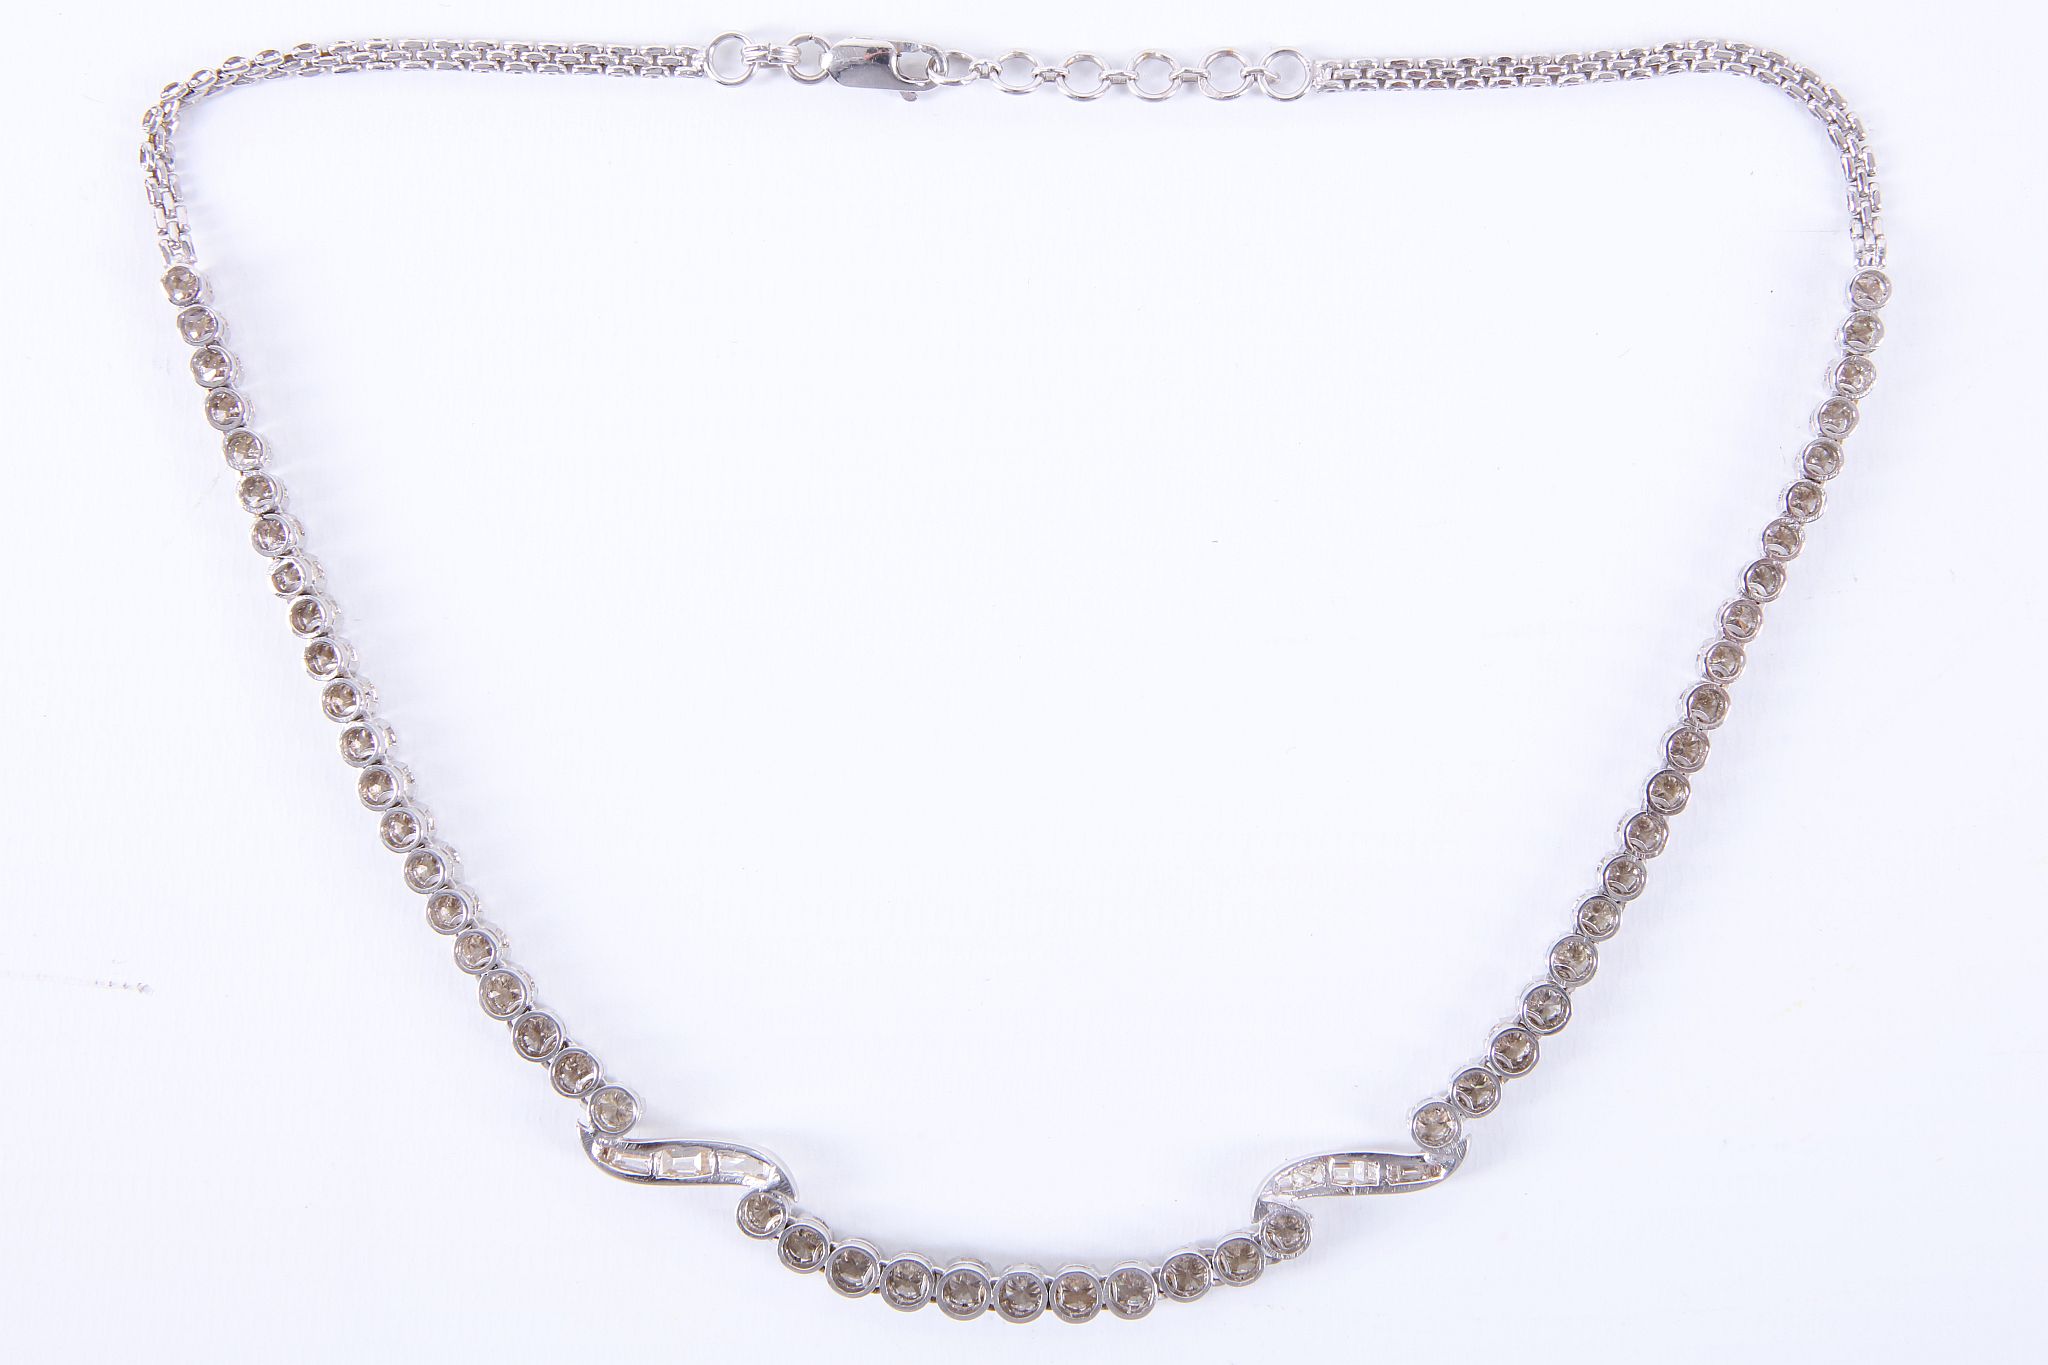 A 14ct white gold and diamond set necklace, the 53 graduated brilliant round cut stones interspersed - Image 5 of 5